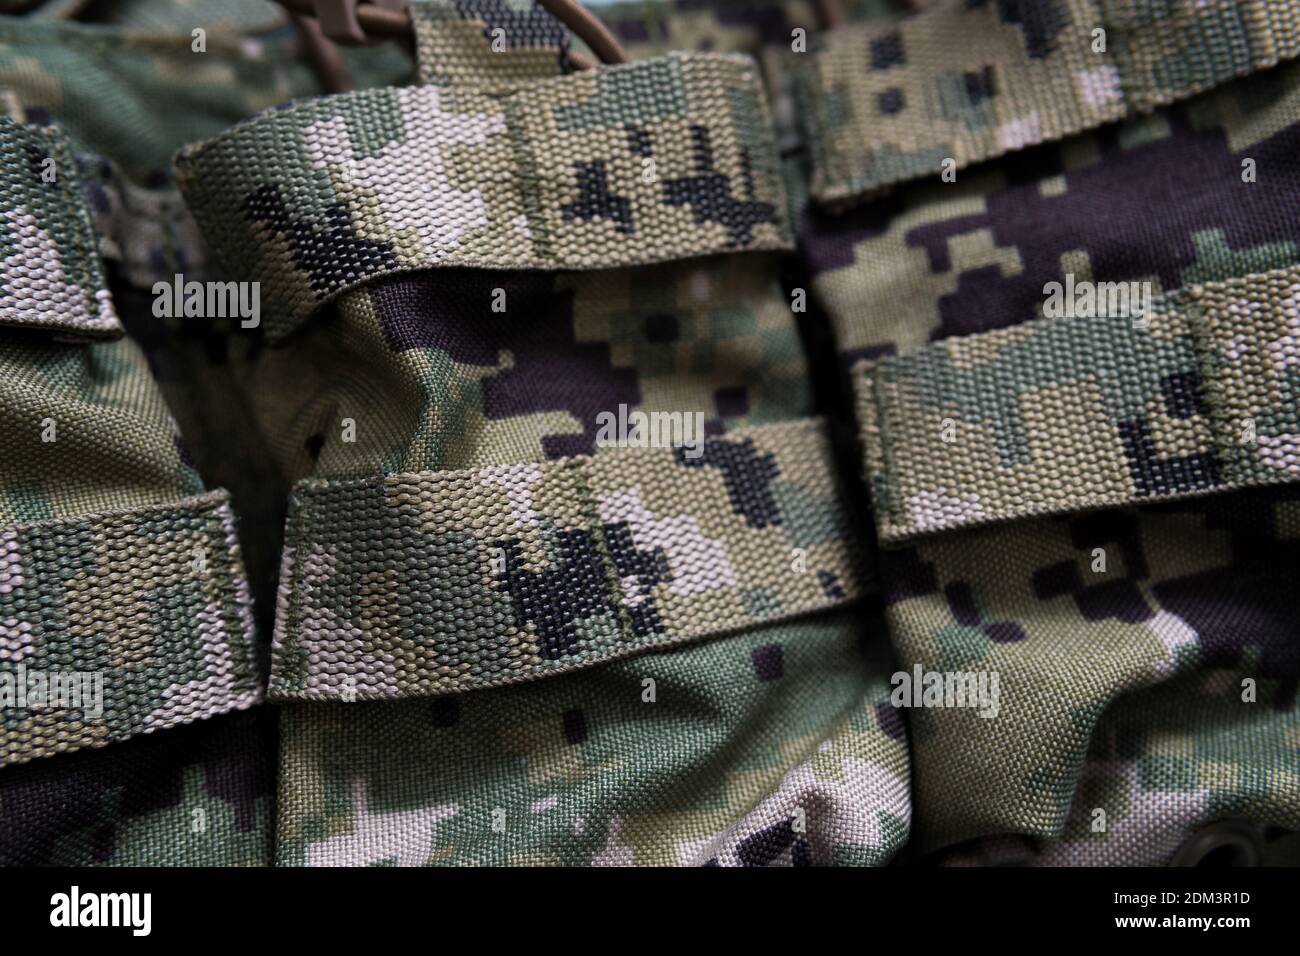 A closeup shot of camouflage military gear Stock Photo